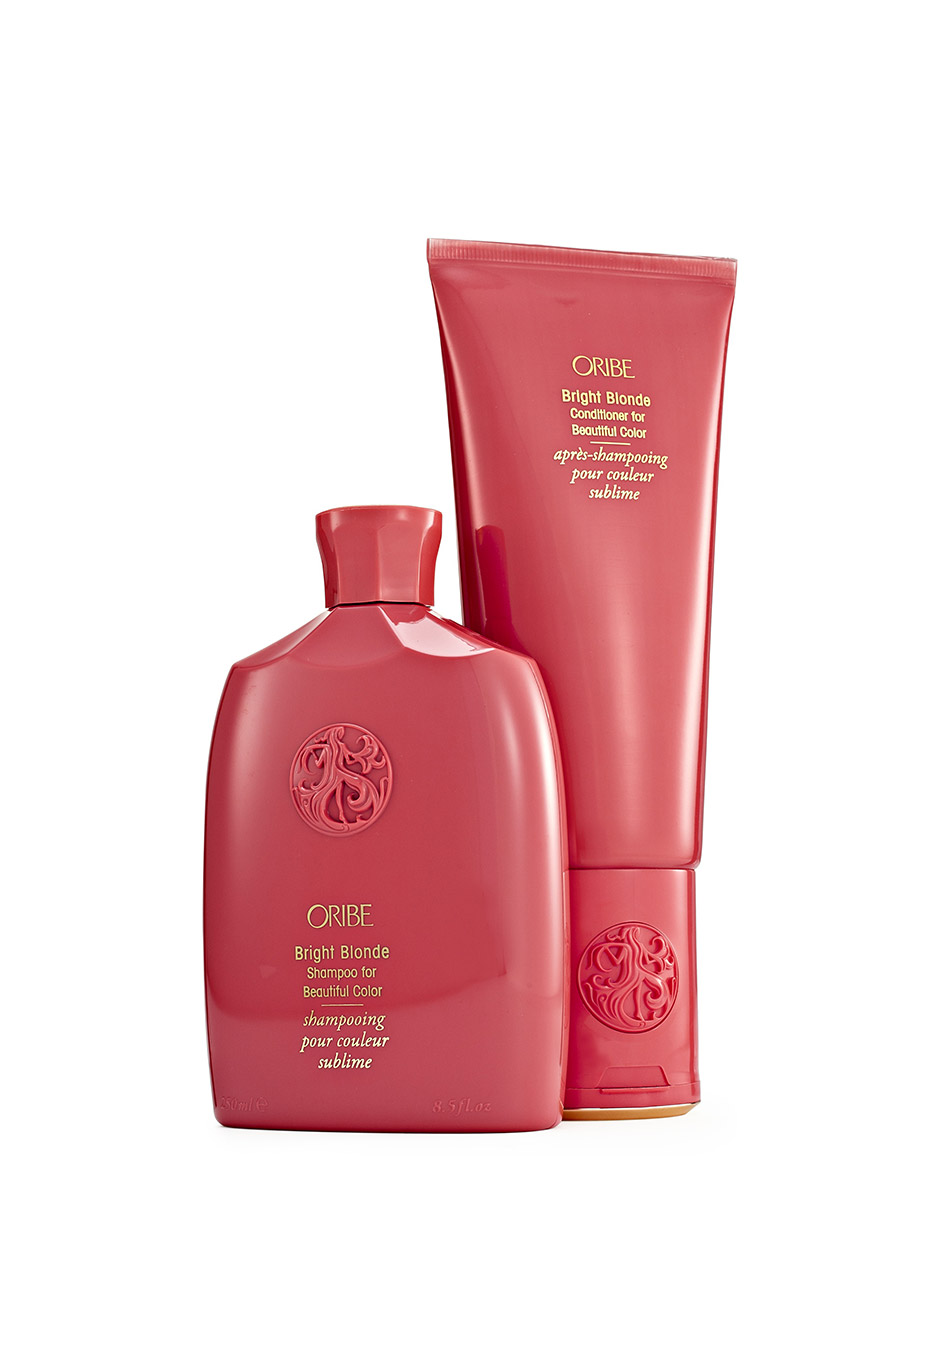 Oribe Bright Blonde shampoo and conditioner - available at Lounge Hair Boutique - Unisex hairdressers in Ashford, Kent